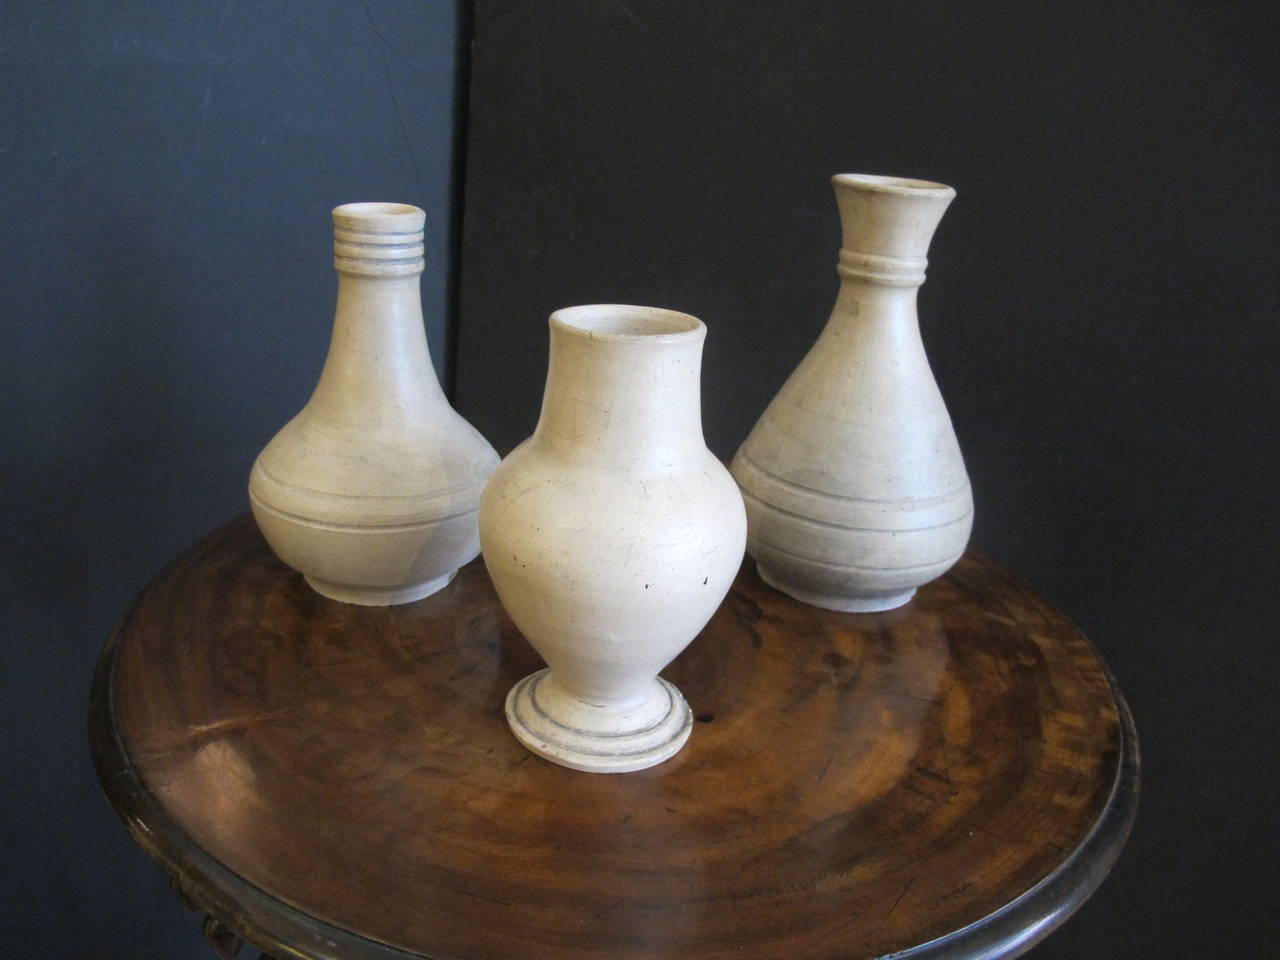 Three white glazed earthenware vases handmade in Martinique. Each with hand-written labels underneath inscribed 'La Martinique'. A former French colony, Martinique has a long history of pottery production on the island. A brickworks clustered around